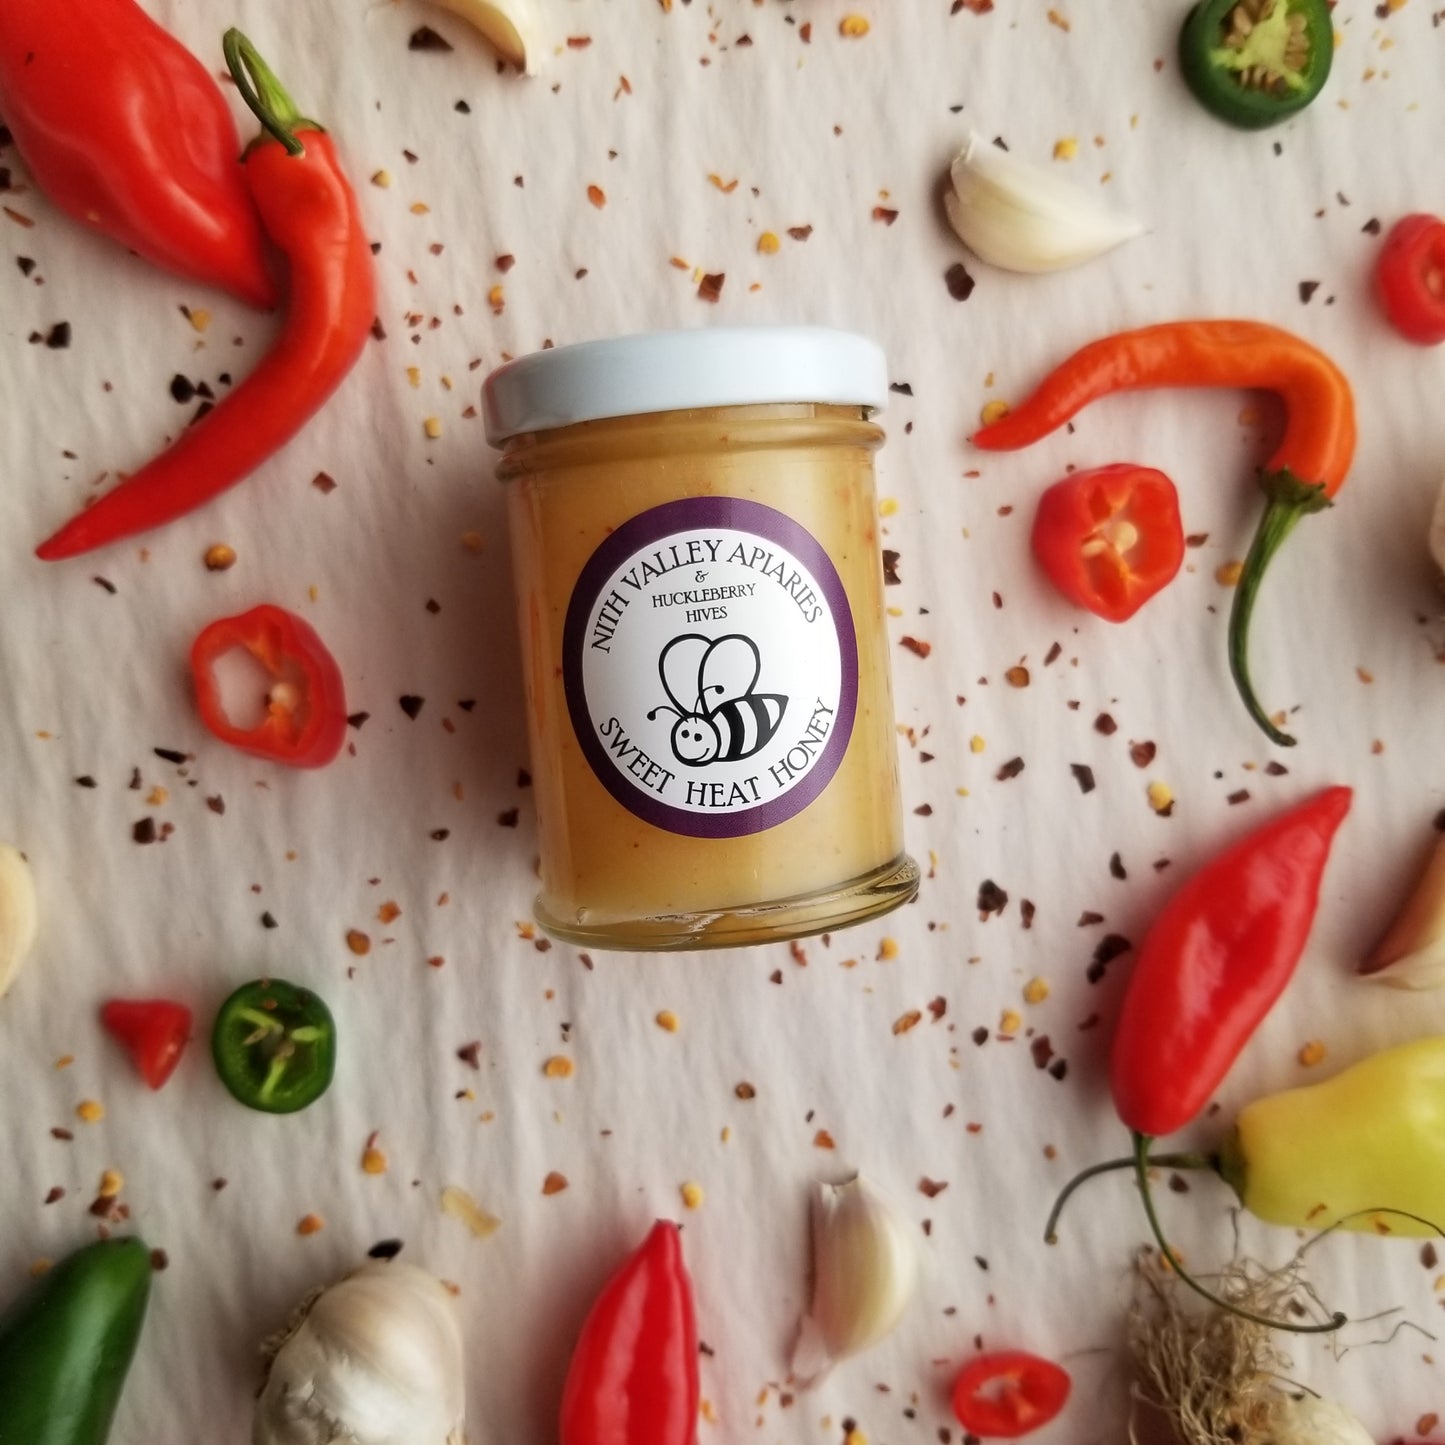 Sweet Heat Honey 90g Jar displayed with garlic and hot peppers artfully arranged in the background.